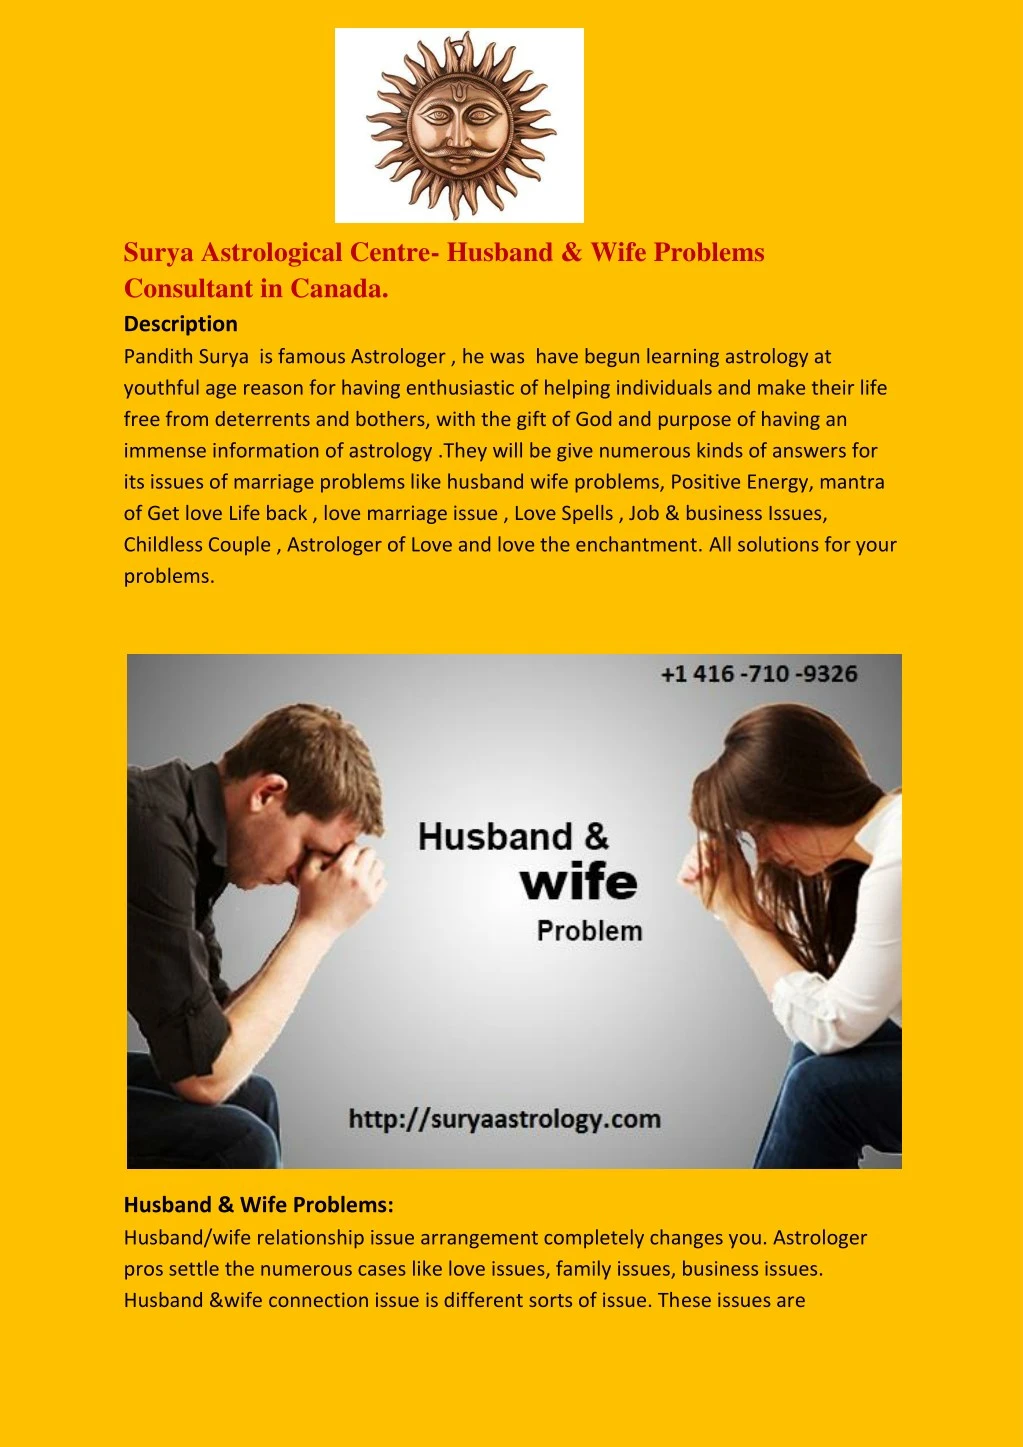 surya astrological centre husband wife problems